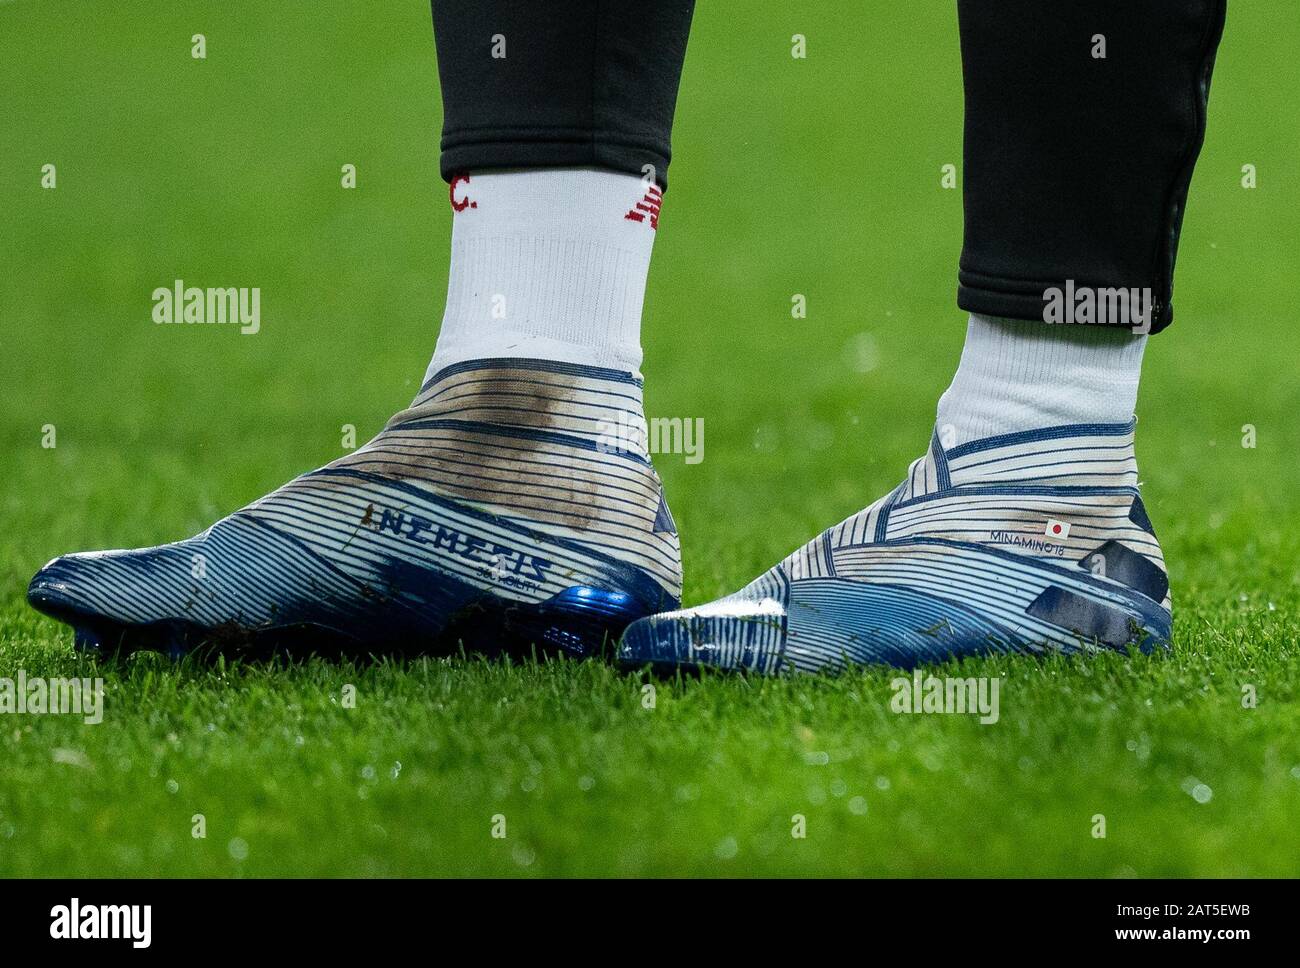 The Adidas Nemesis football boots of Takumi Minamino of Liverpool  displaying Japan flag during the Premier League match between West Ham  United and Liverpool at the Olympic Park, London, England on 29